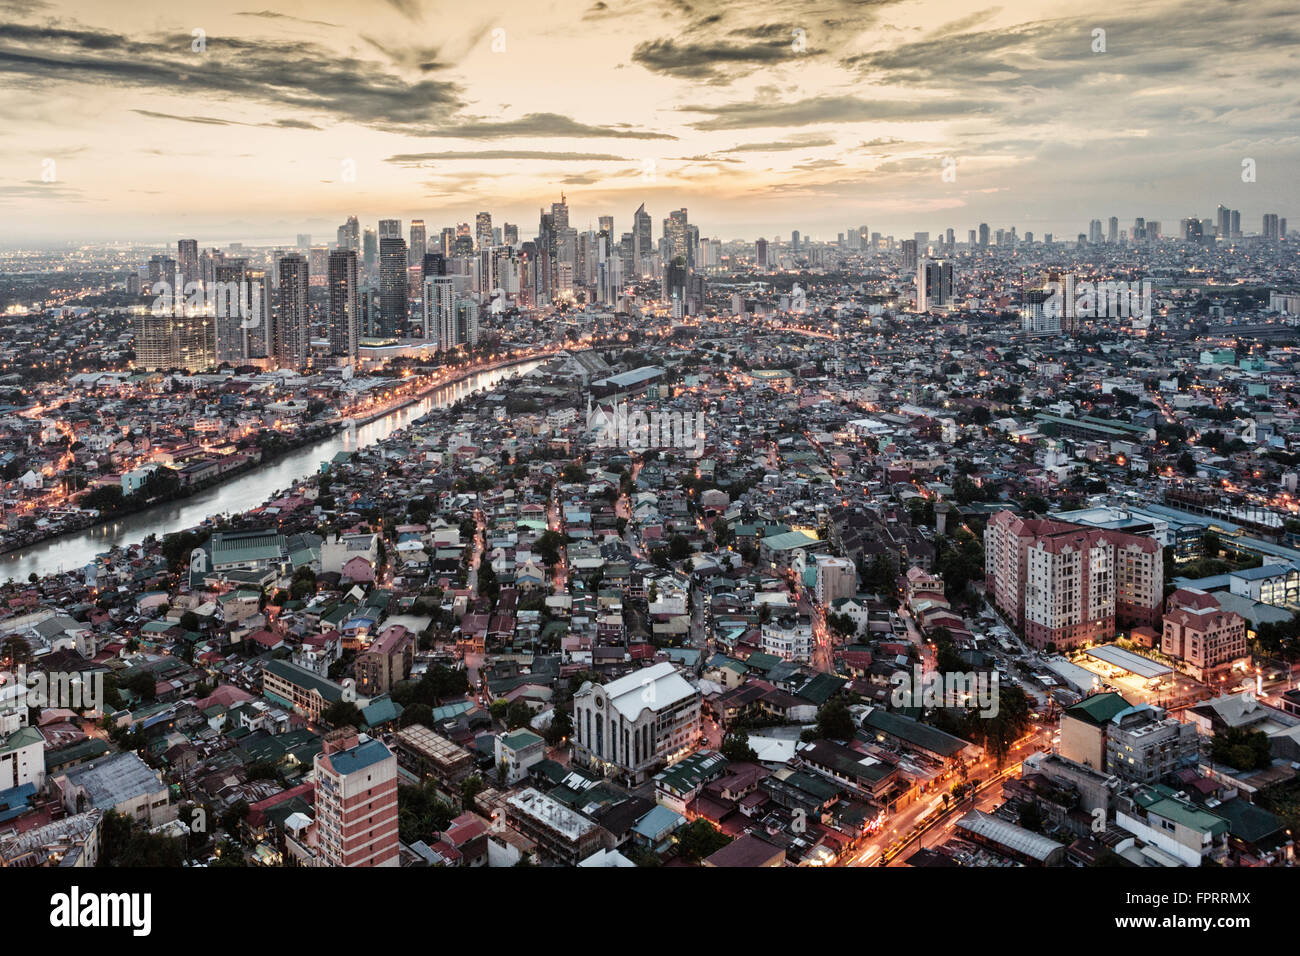 Asia, East Asia, Philippines, Manila, Makati and Pasig river, business district, skyscrapers, city skyline, sunset view Stock Photo